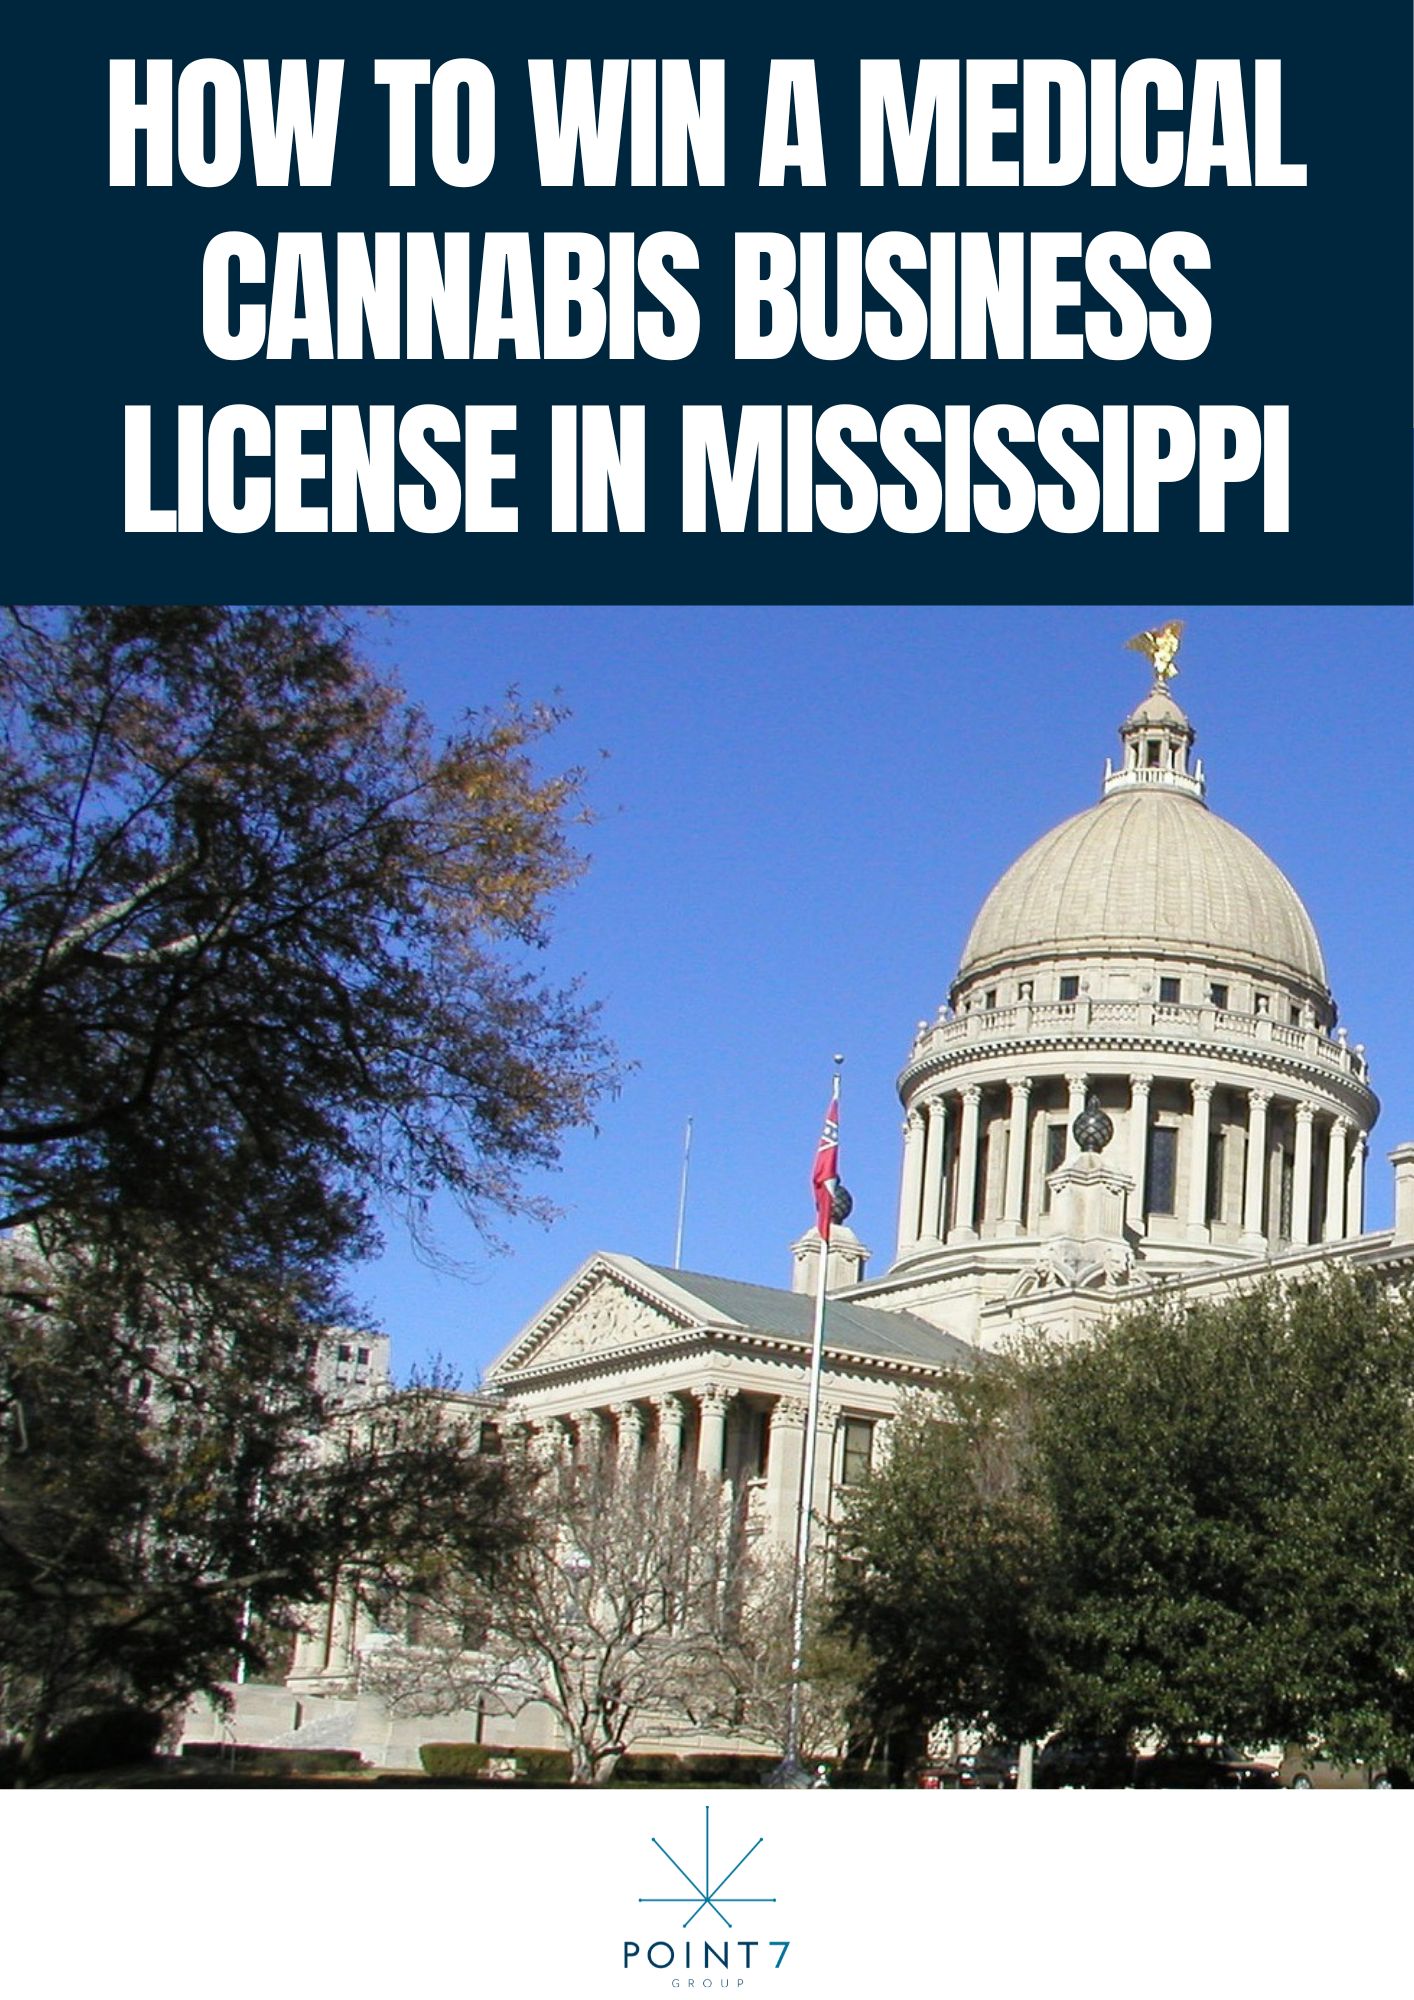 How to Win a Medical Cannabis Business License in Mississippi